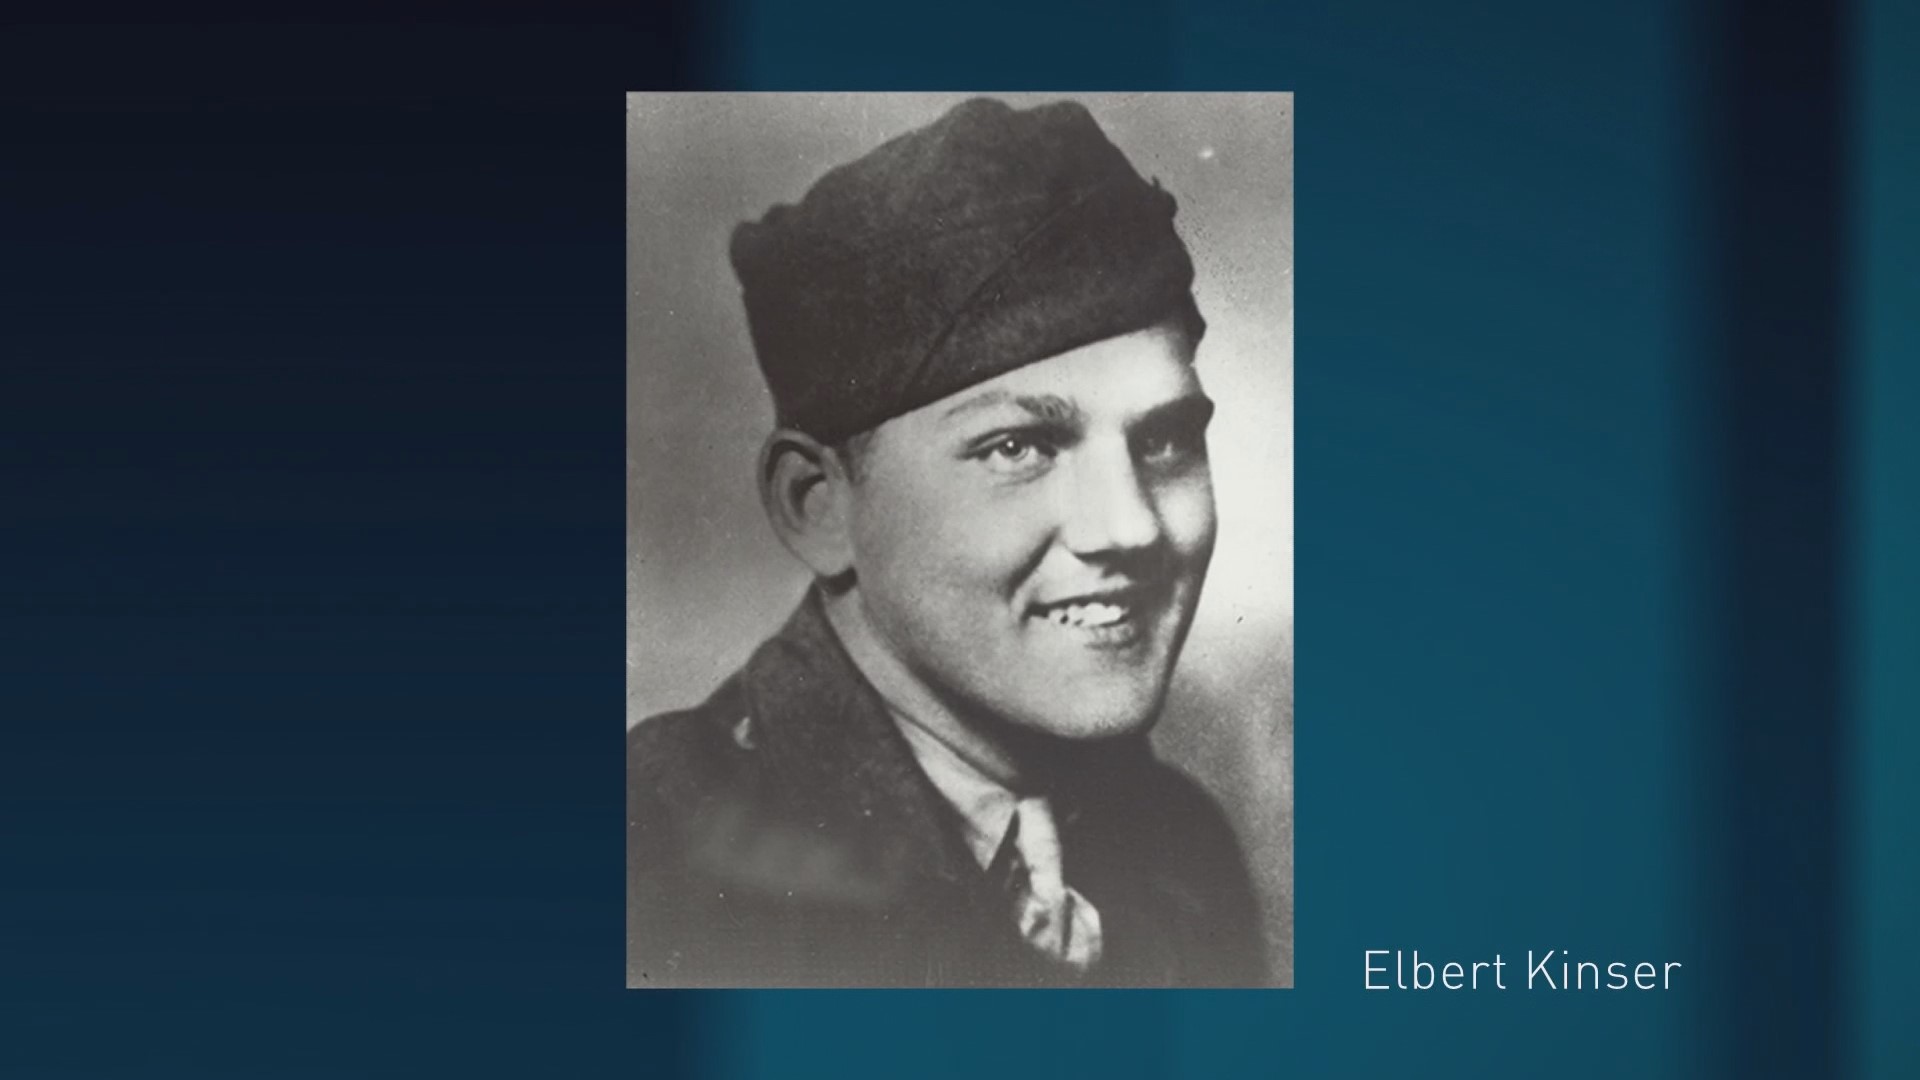 Out of the millions who have served in the U.S. Armed Forces, only 3,507 have received the Medal of Honor. Elbert Kinser is one of 14 recipients from East Tennessee.